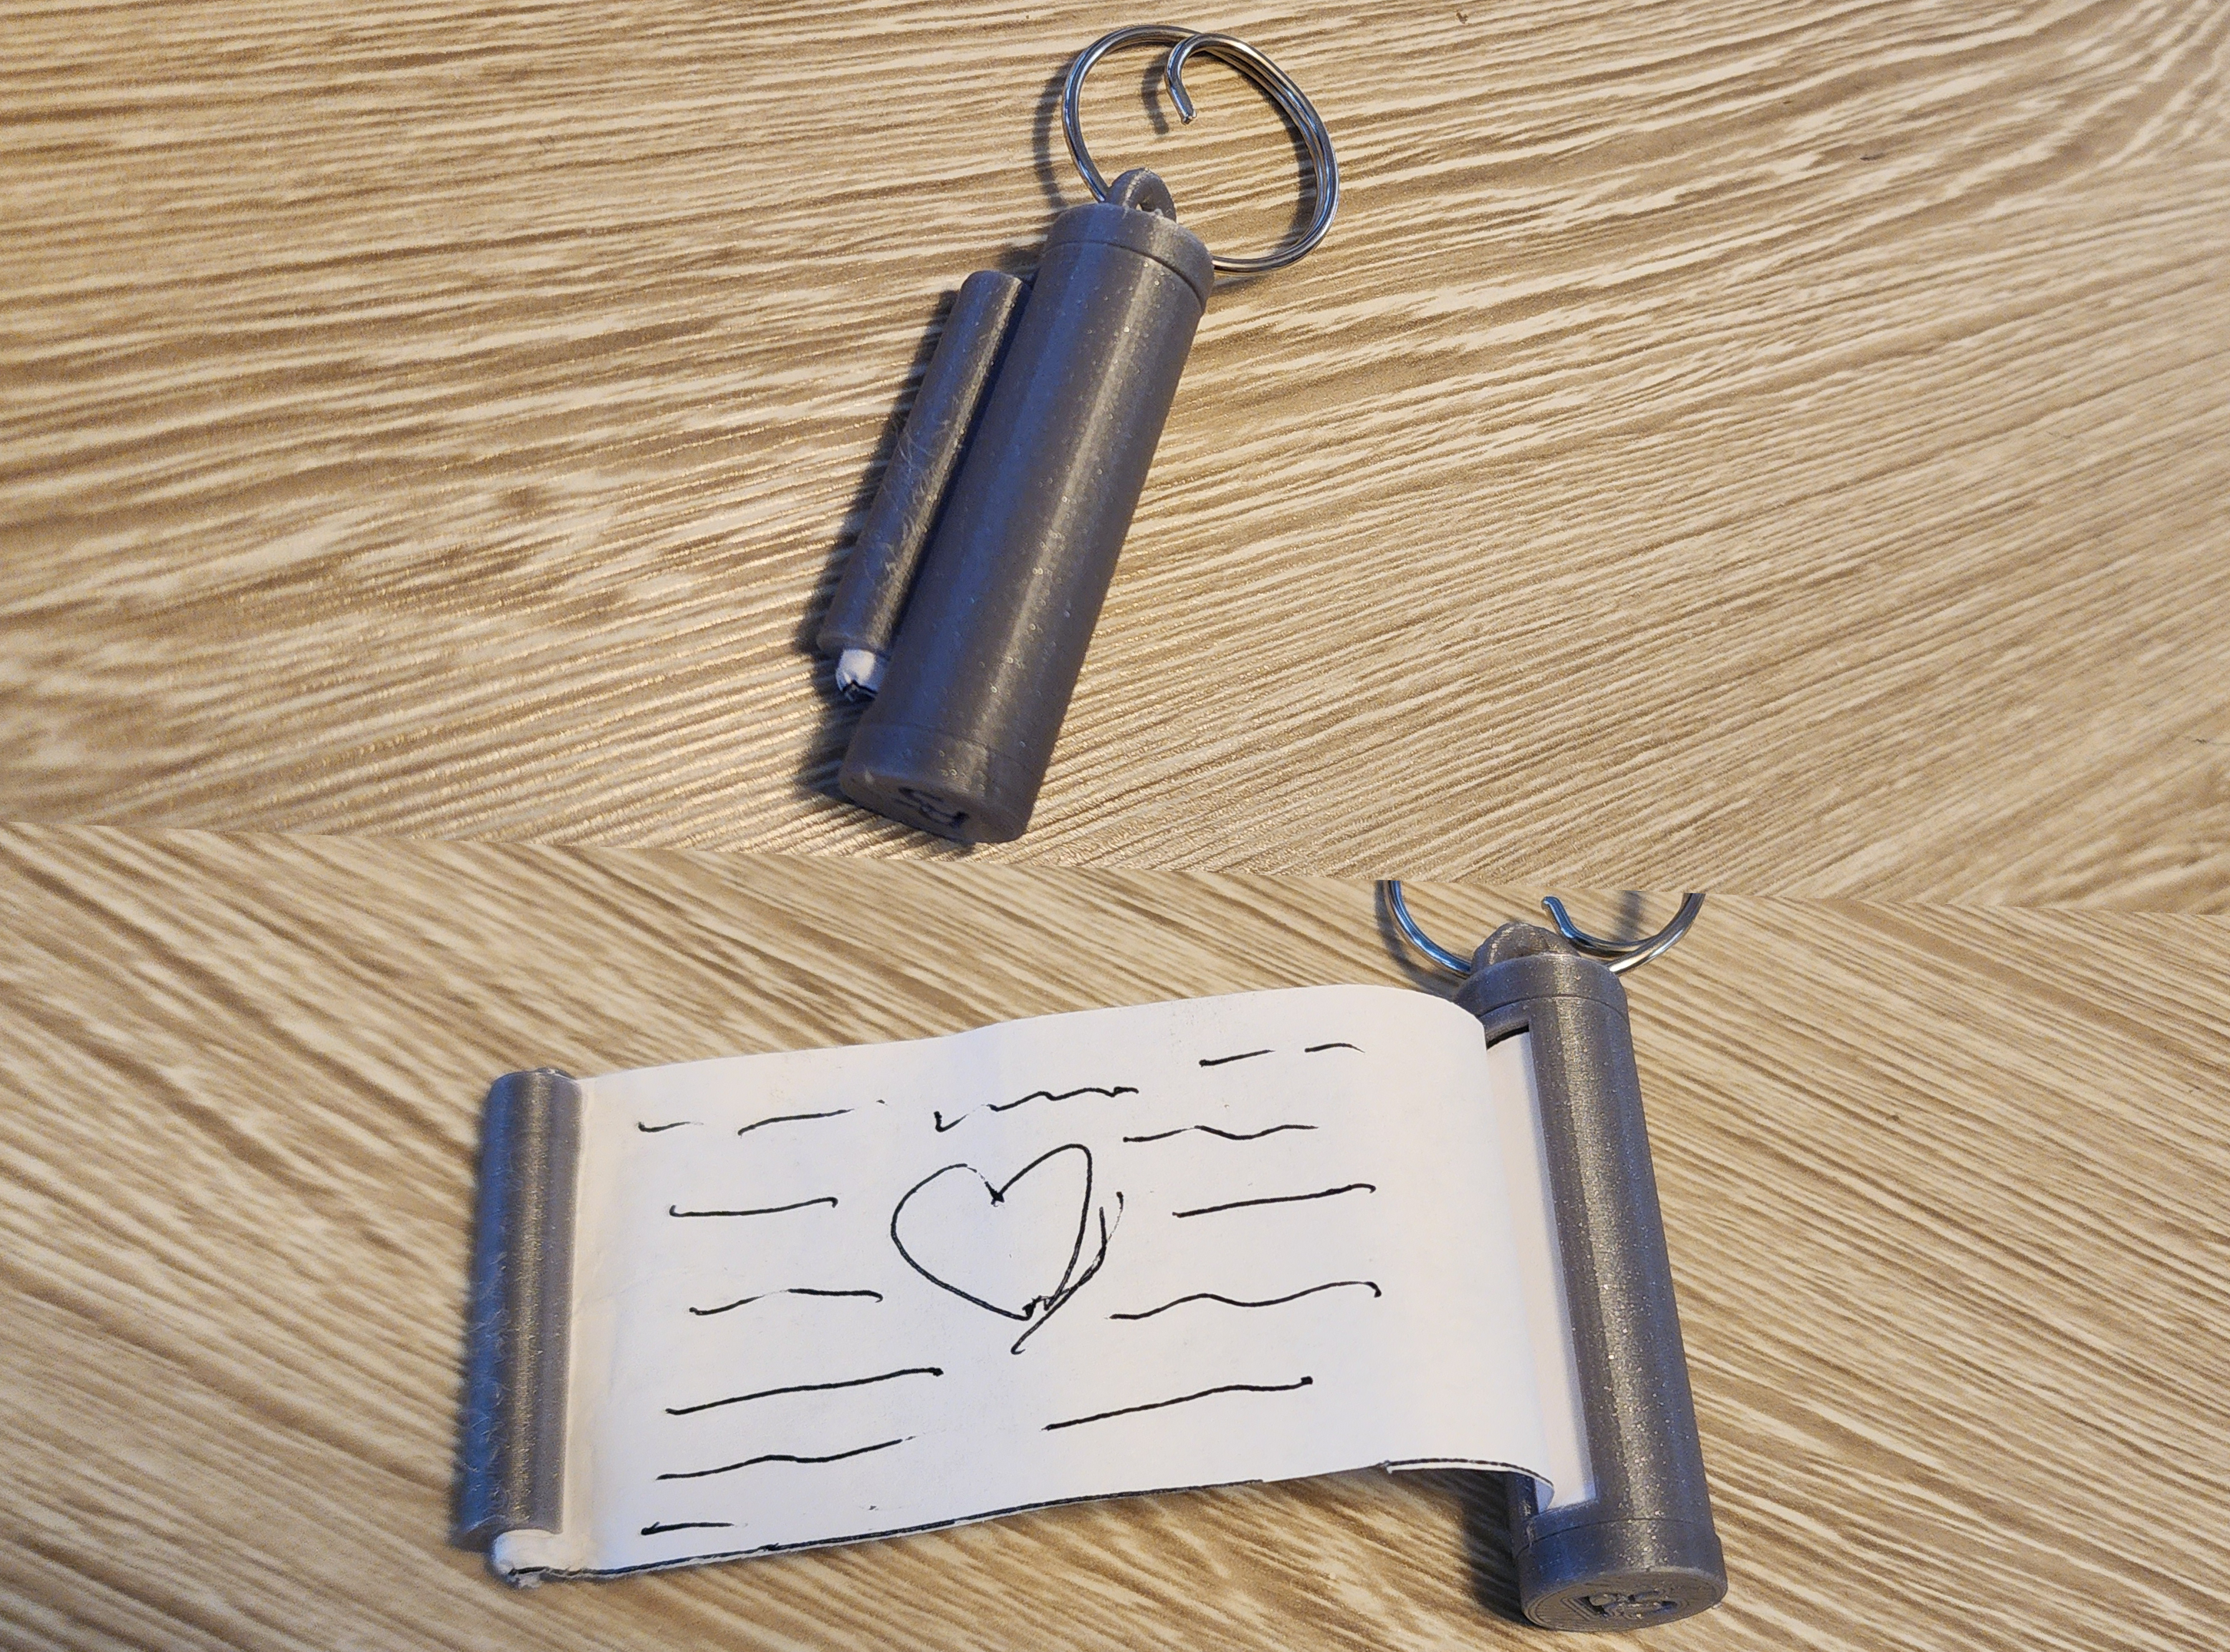 Pocket Scroll Keychain - holds 80cm of paper easy roll-up